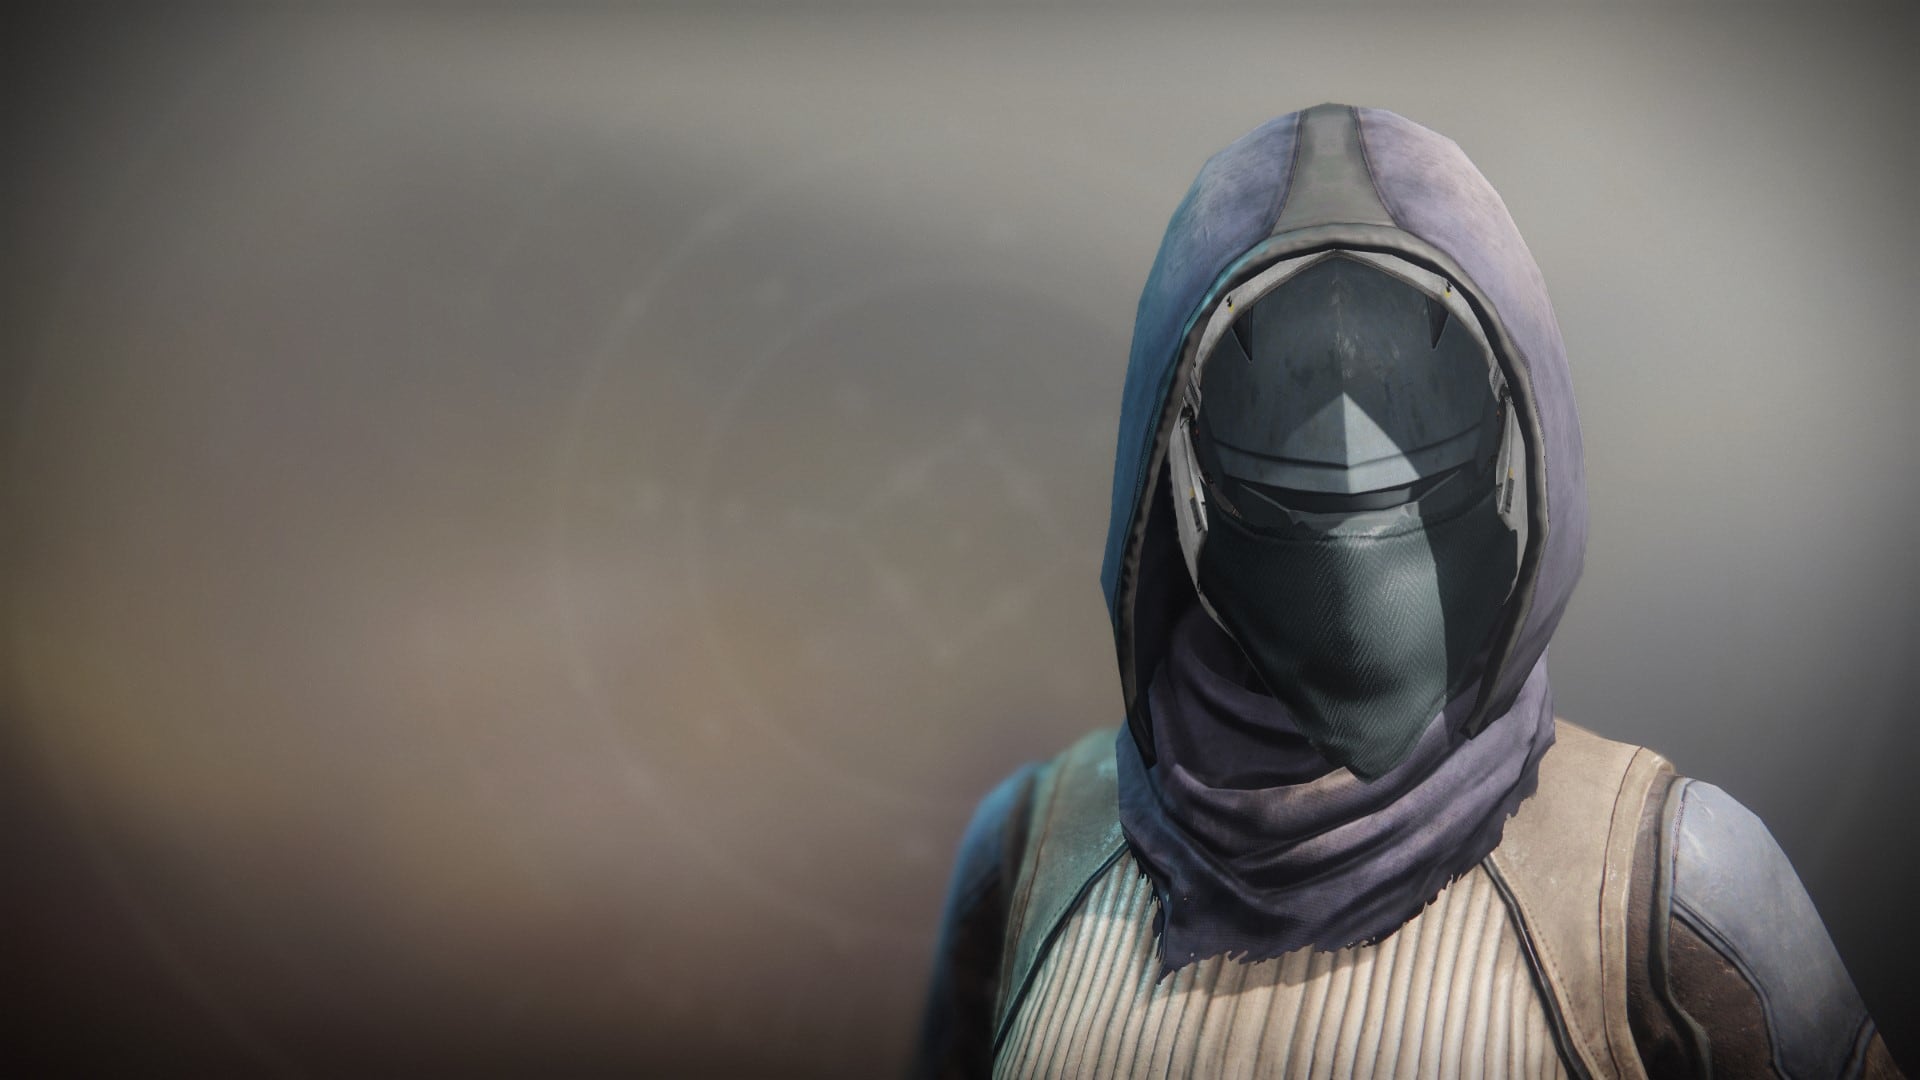 An in-game render of the Solstice Mask (Drained).